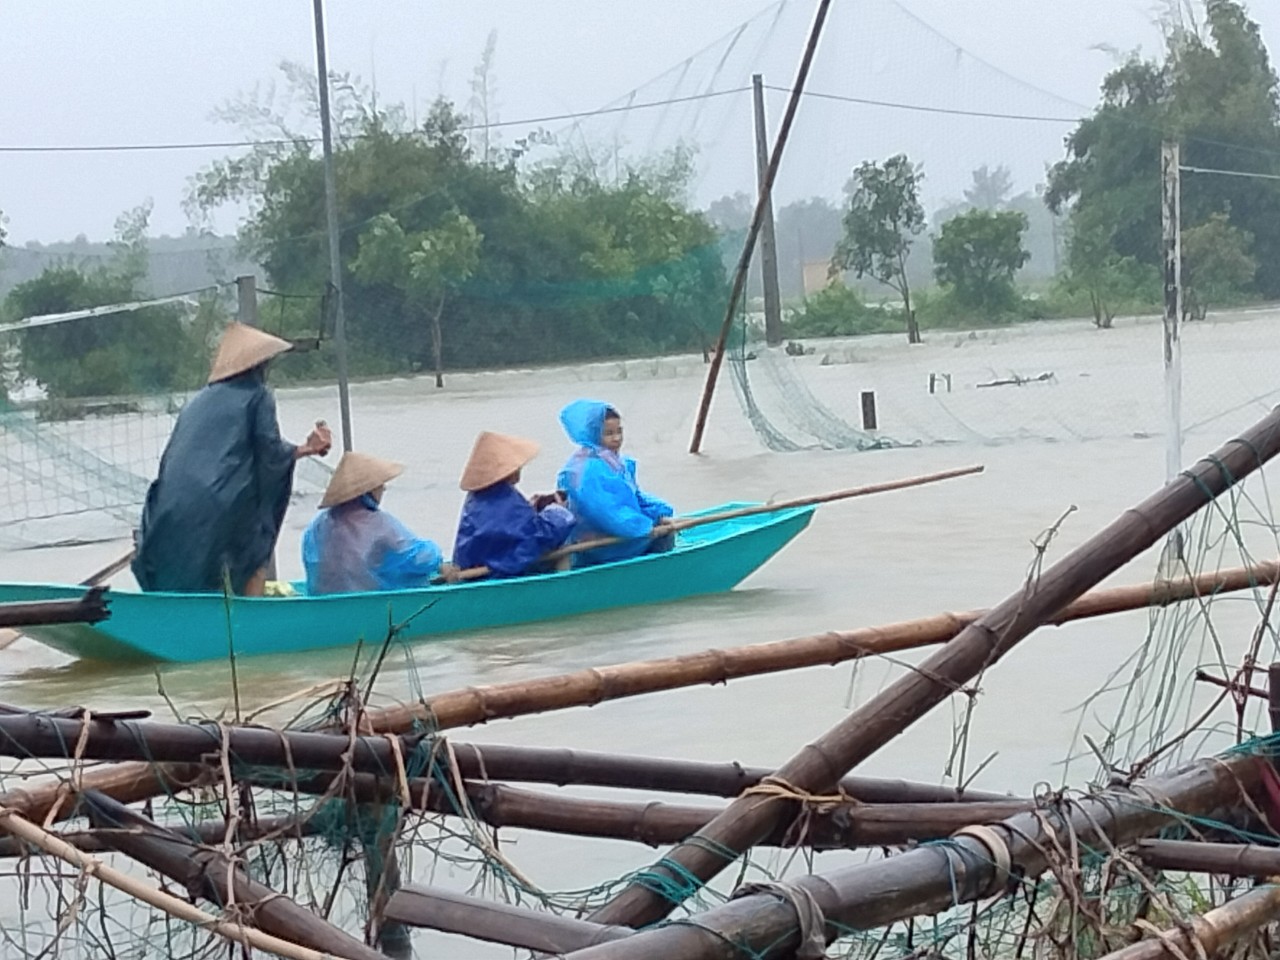 Residents travel on a boat due to serious flooding in Ha Tinh Province, October 17, 2021 in this supplied photo.